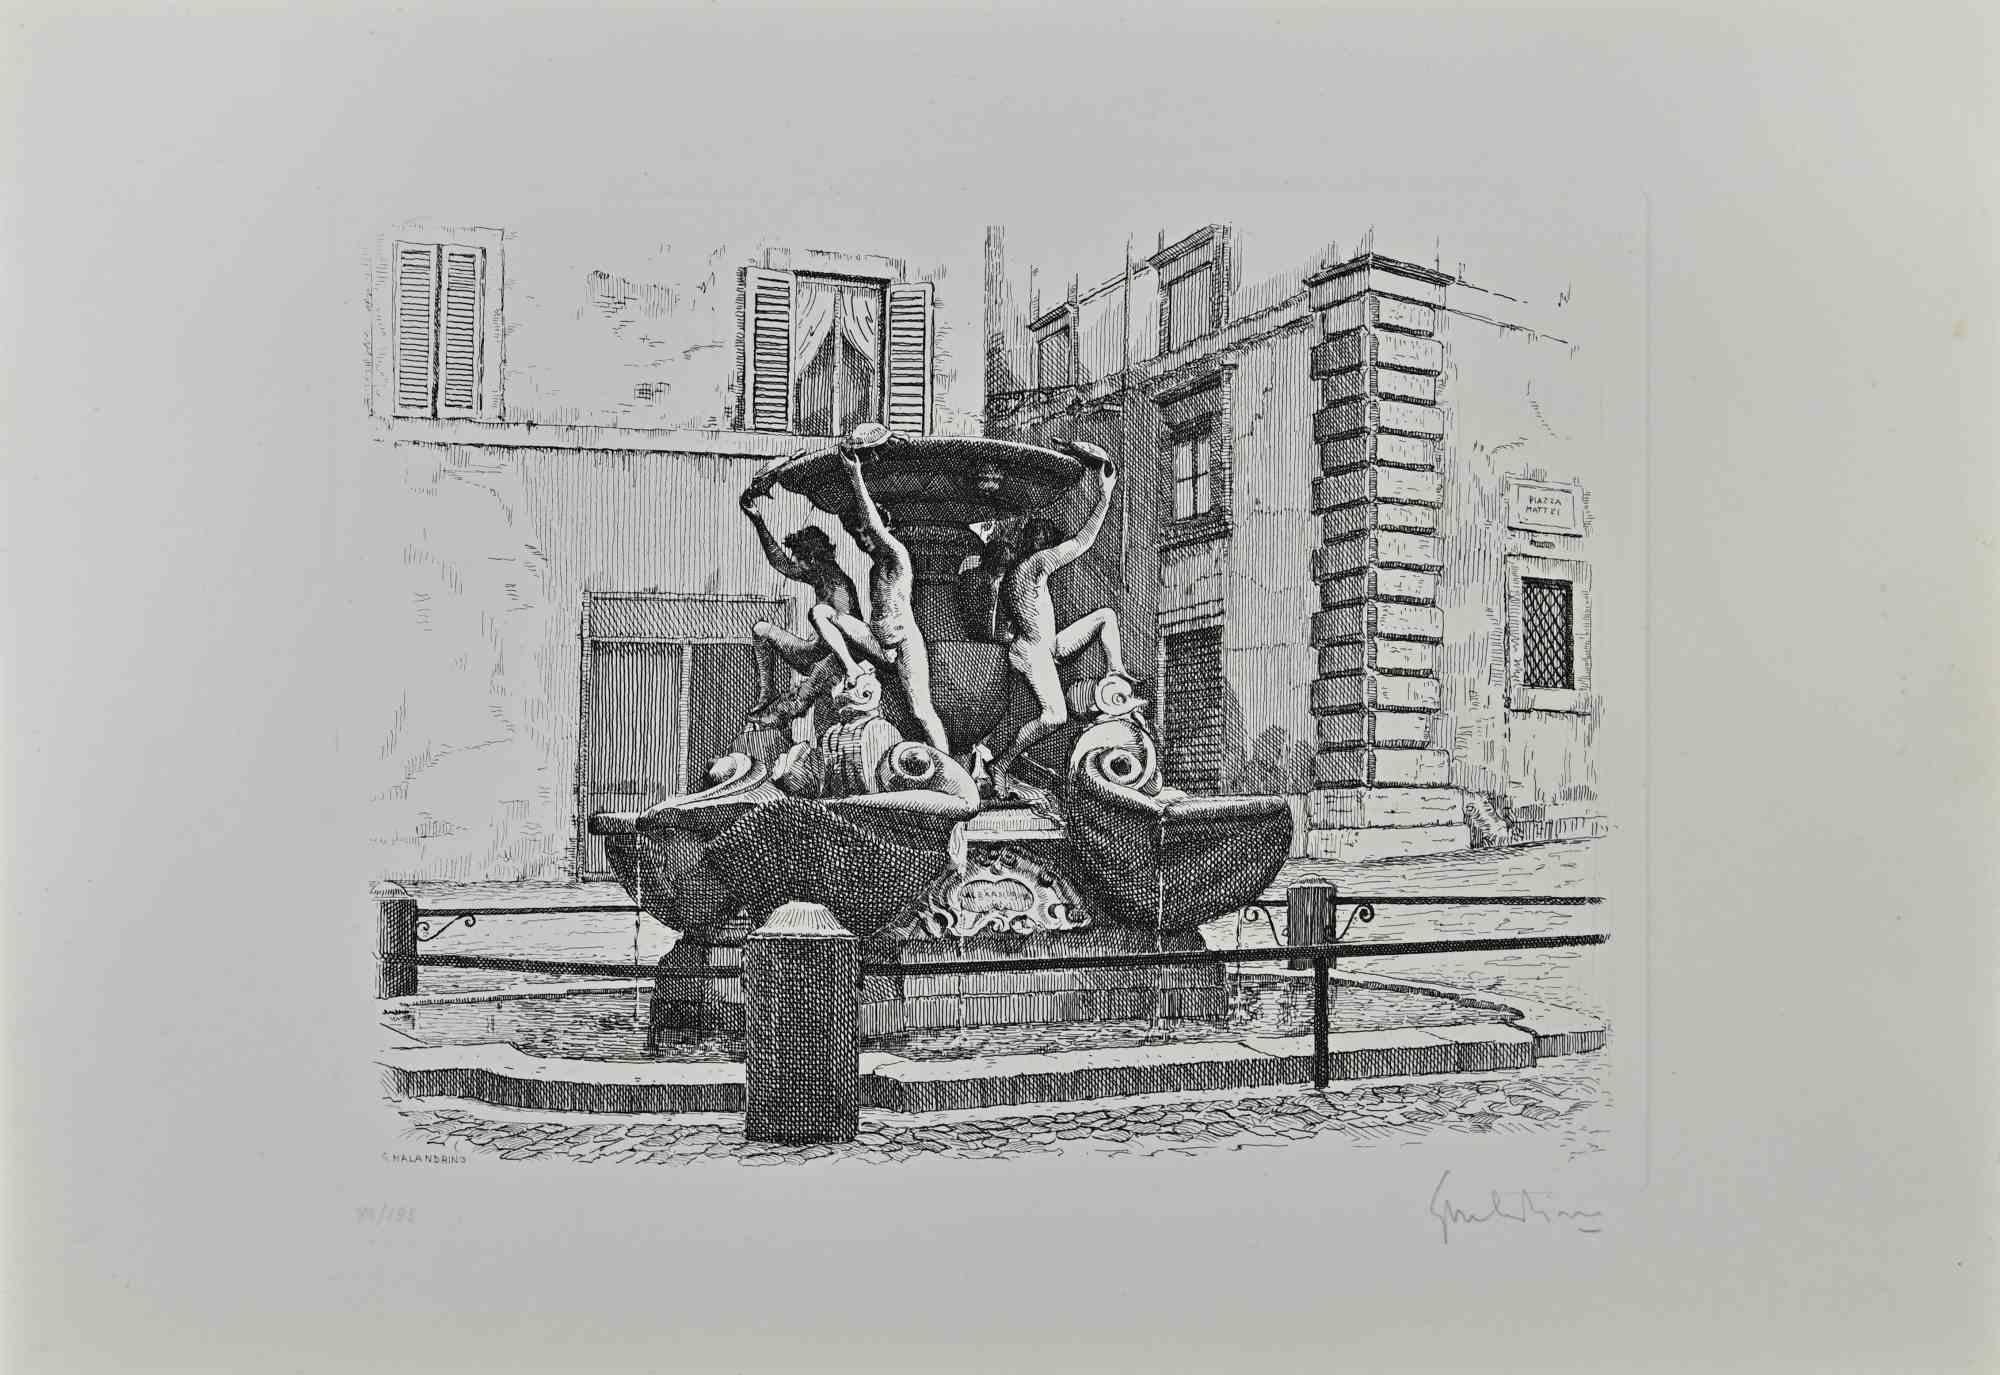 Turtle Fountain - Rome is an original artwork realized by Giuseppe Malandrino.

Original print in etching technique.

Hand-signed by the artist in pencil on the lower right corner.

Numbered edition of 99 copies.

Good conditions. 

This artwork